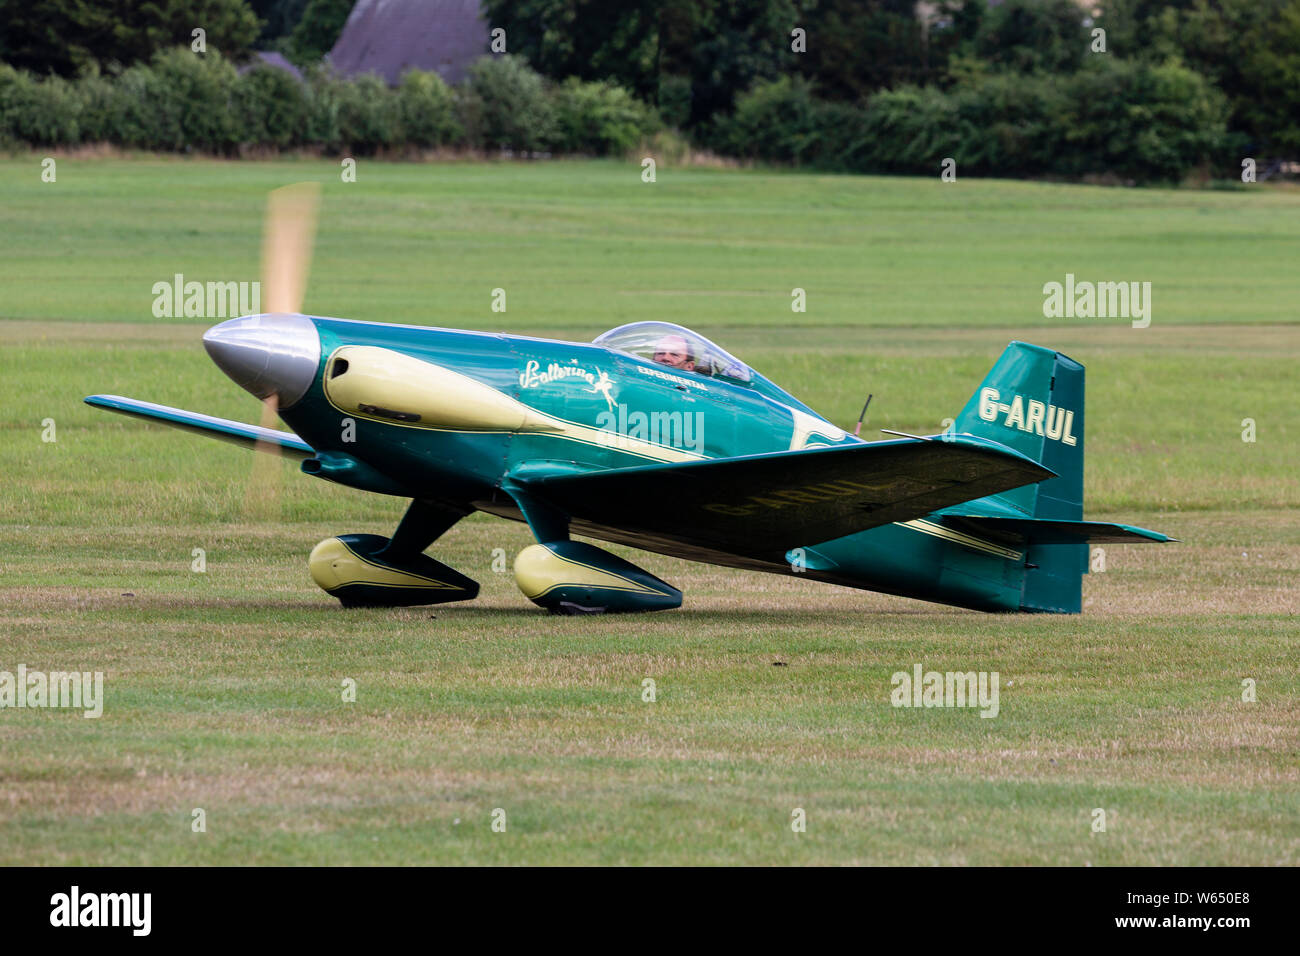 LeVier Cosmic Wind, registered G-ARUL, at Old Warden Stock Photo